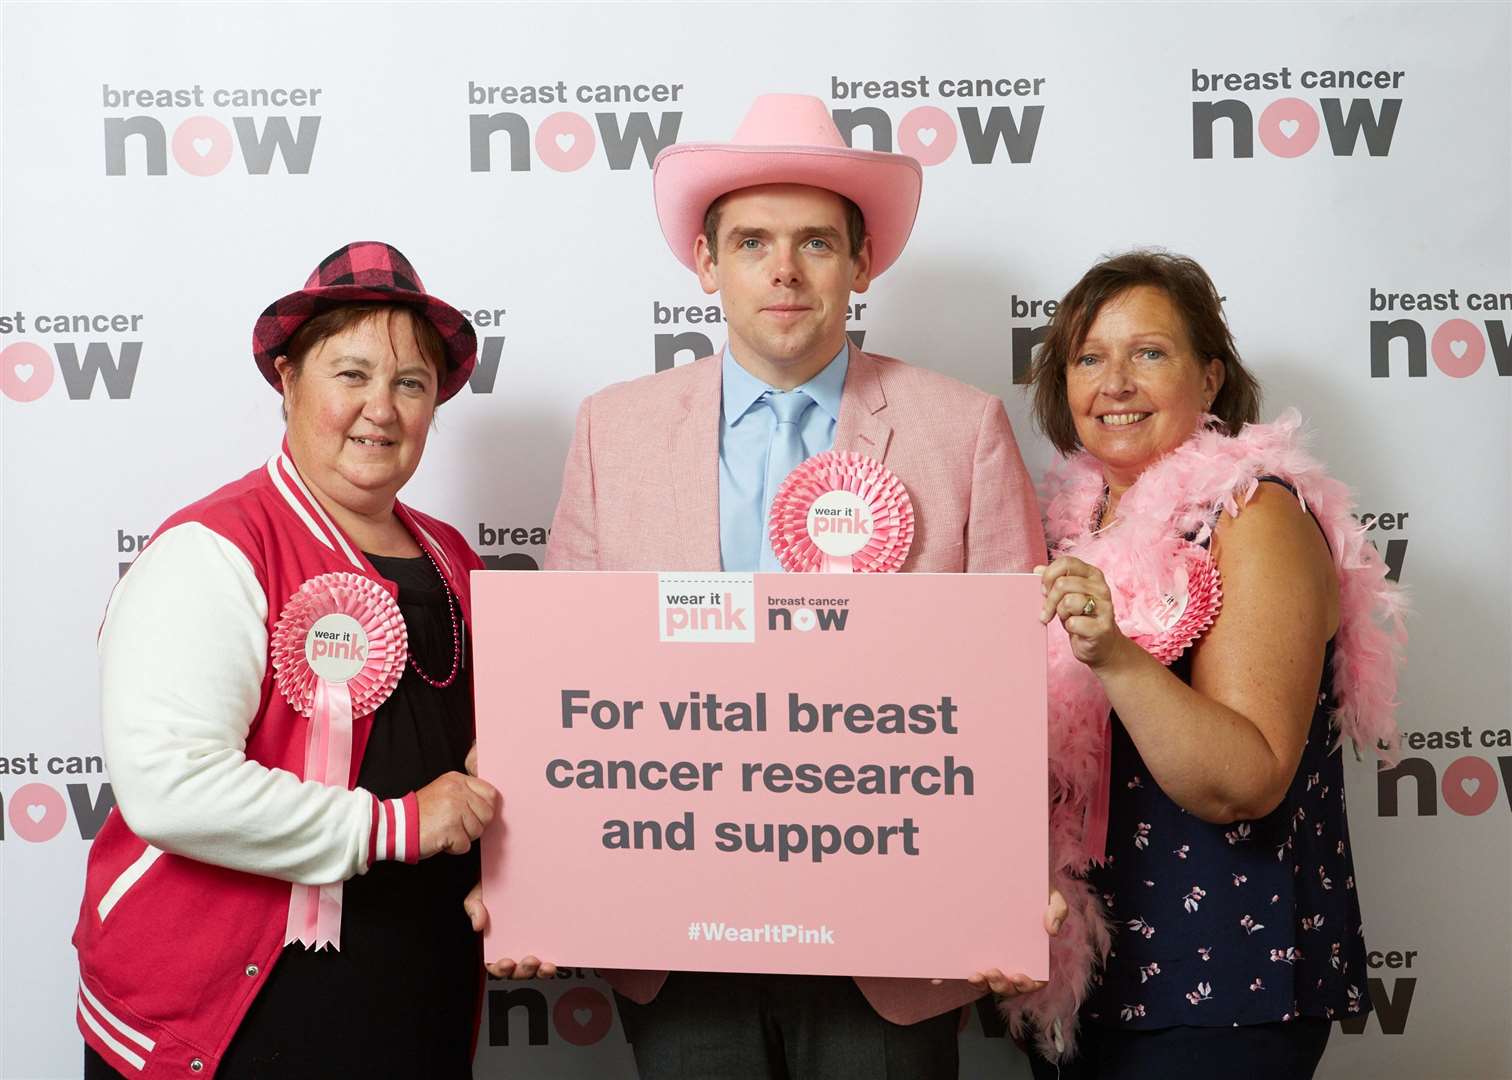 Moray MP Douglas Ross with Wear it Pink campaigners.